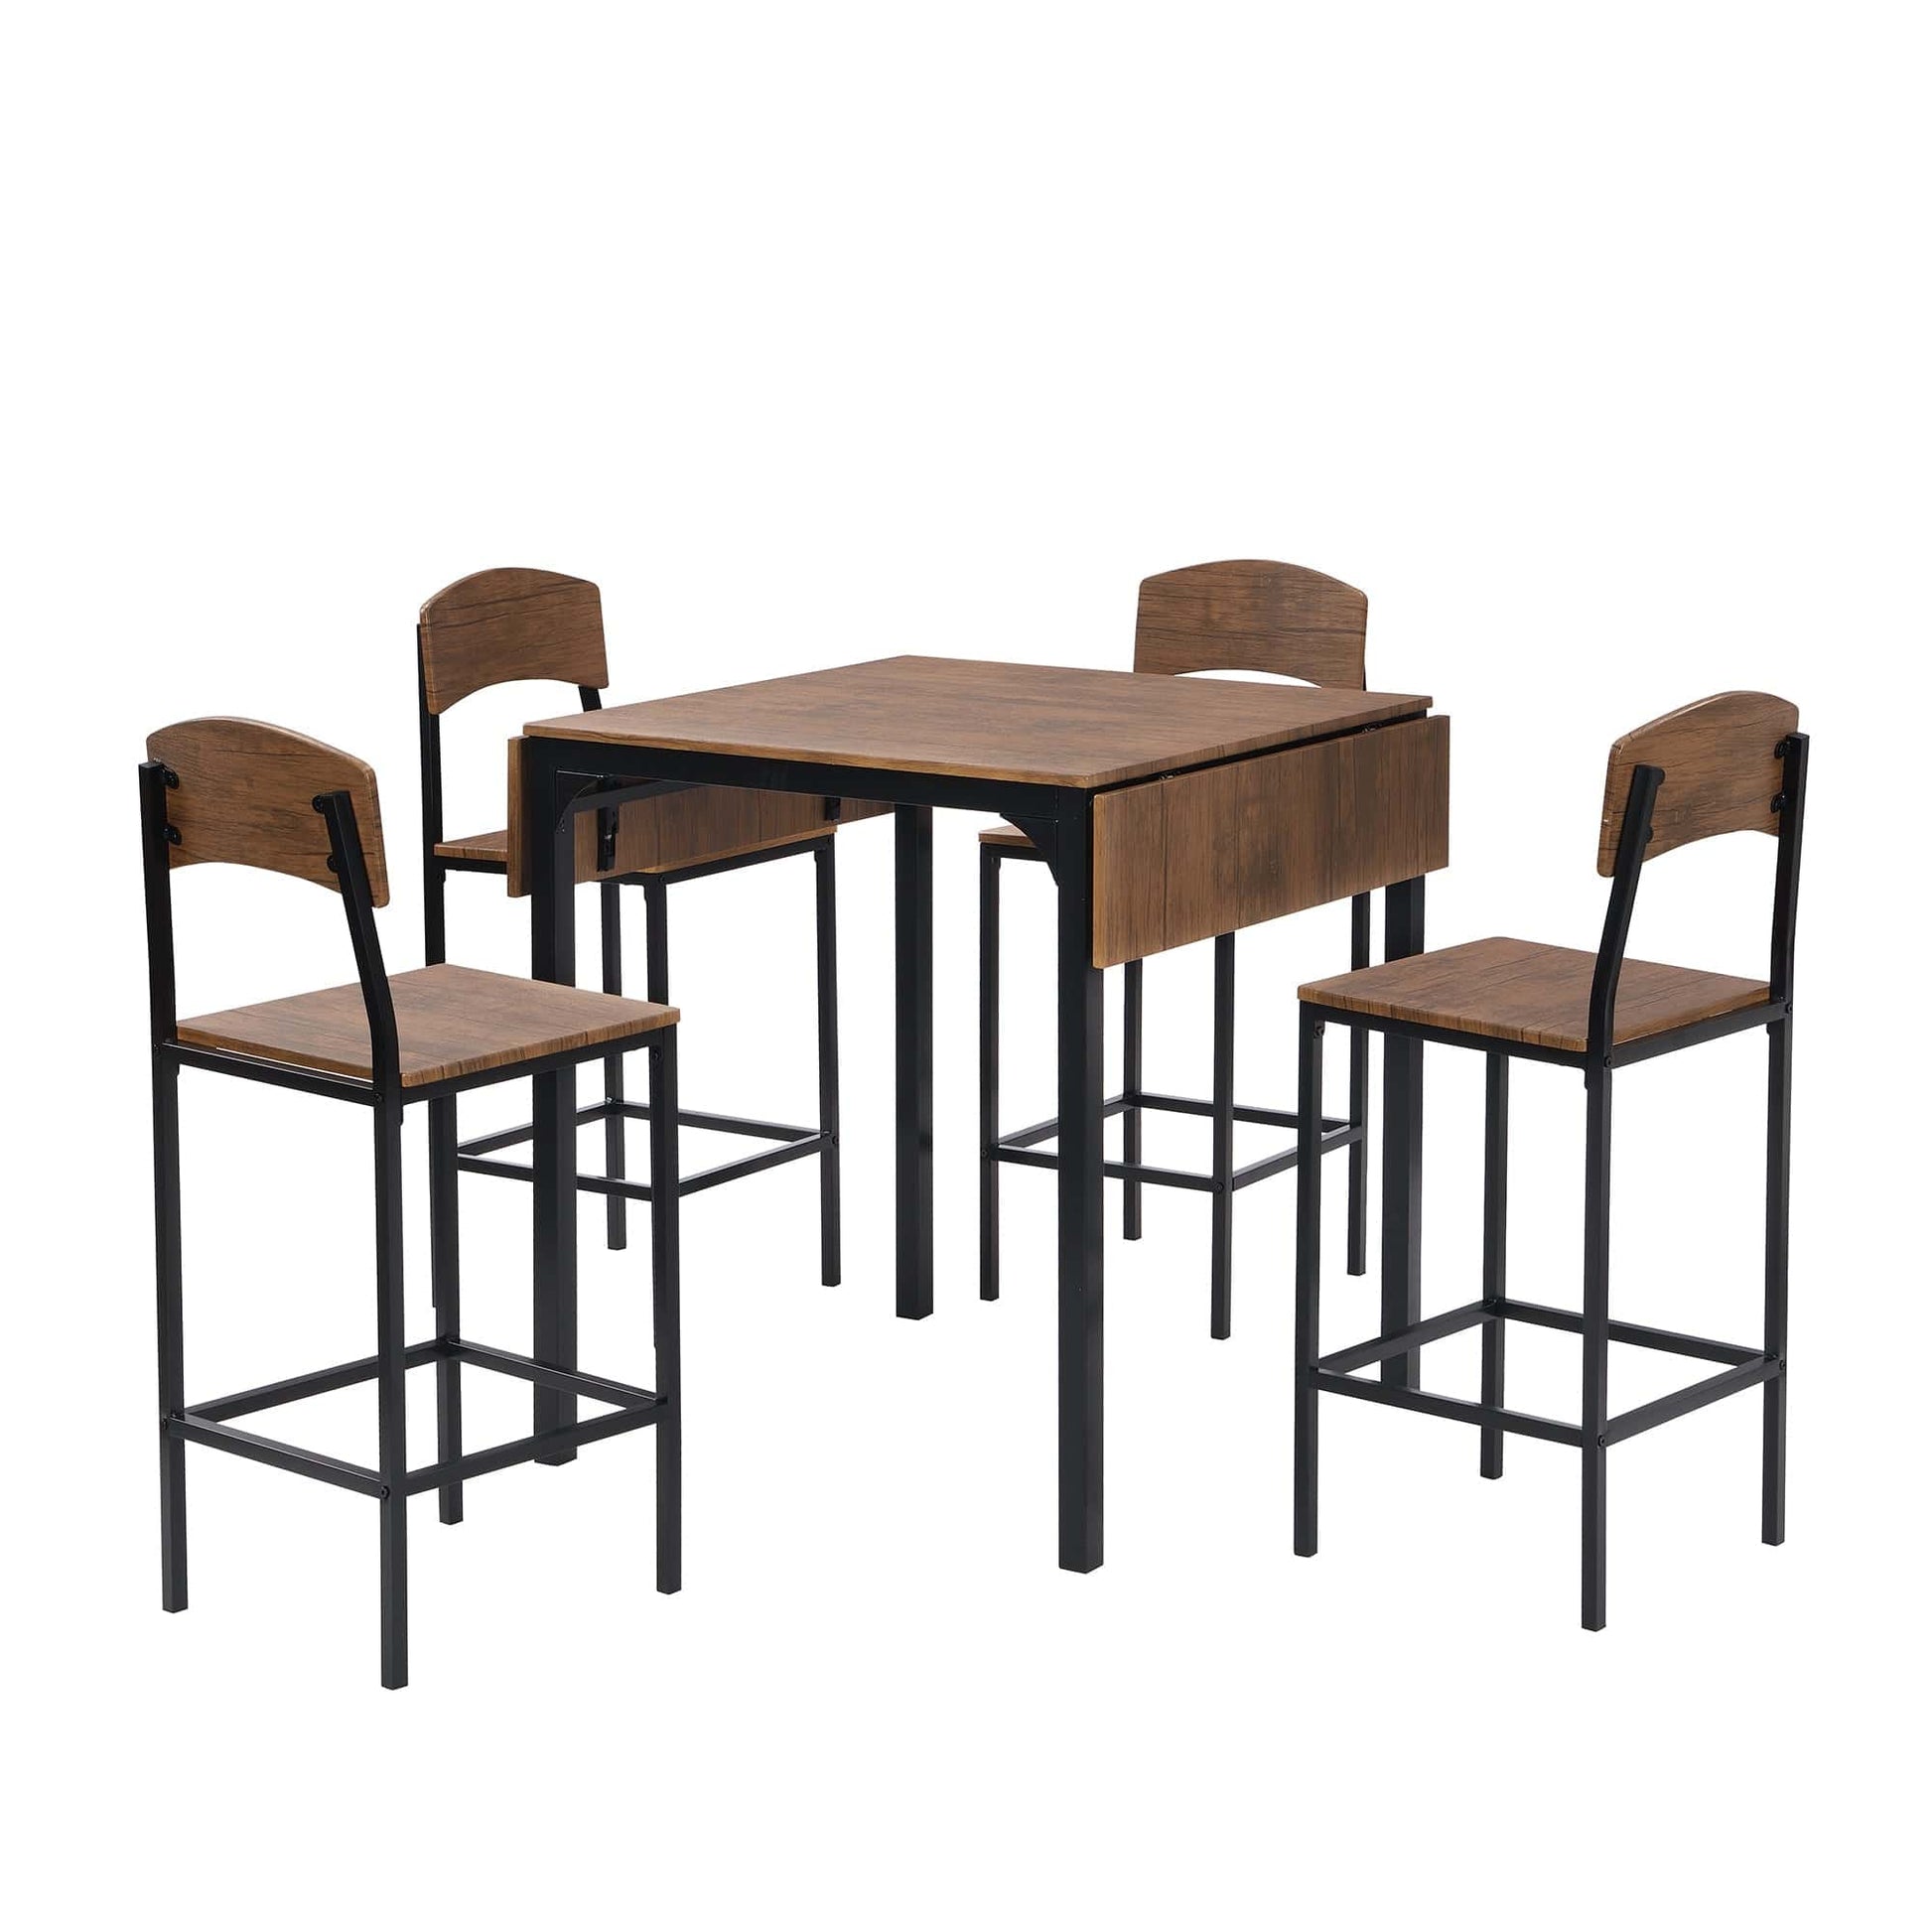 TOPMAX Farmhouse 5-piece Counter Height Drop Leaf Dining Table Set with Dining Chairs for 4,Black Frame+Brown Tabletop - CLASSY CLOSET BOUTIQUETOPMAX Farmhouse 5-piece Counter Height Drop Leaf Dining Table Set with Dining Chairs for 4,Black Frame+Brown TabletopWF290233AAB